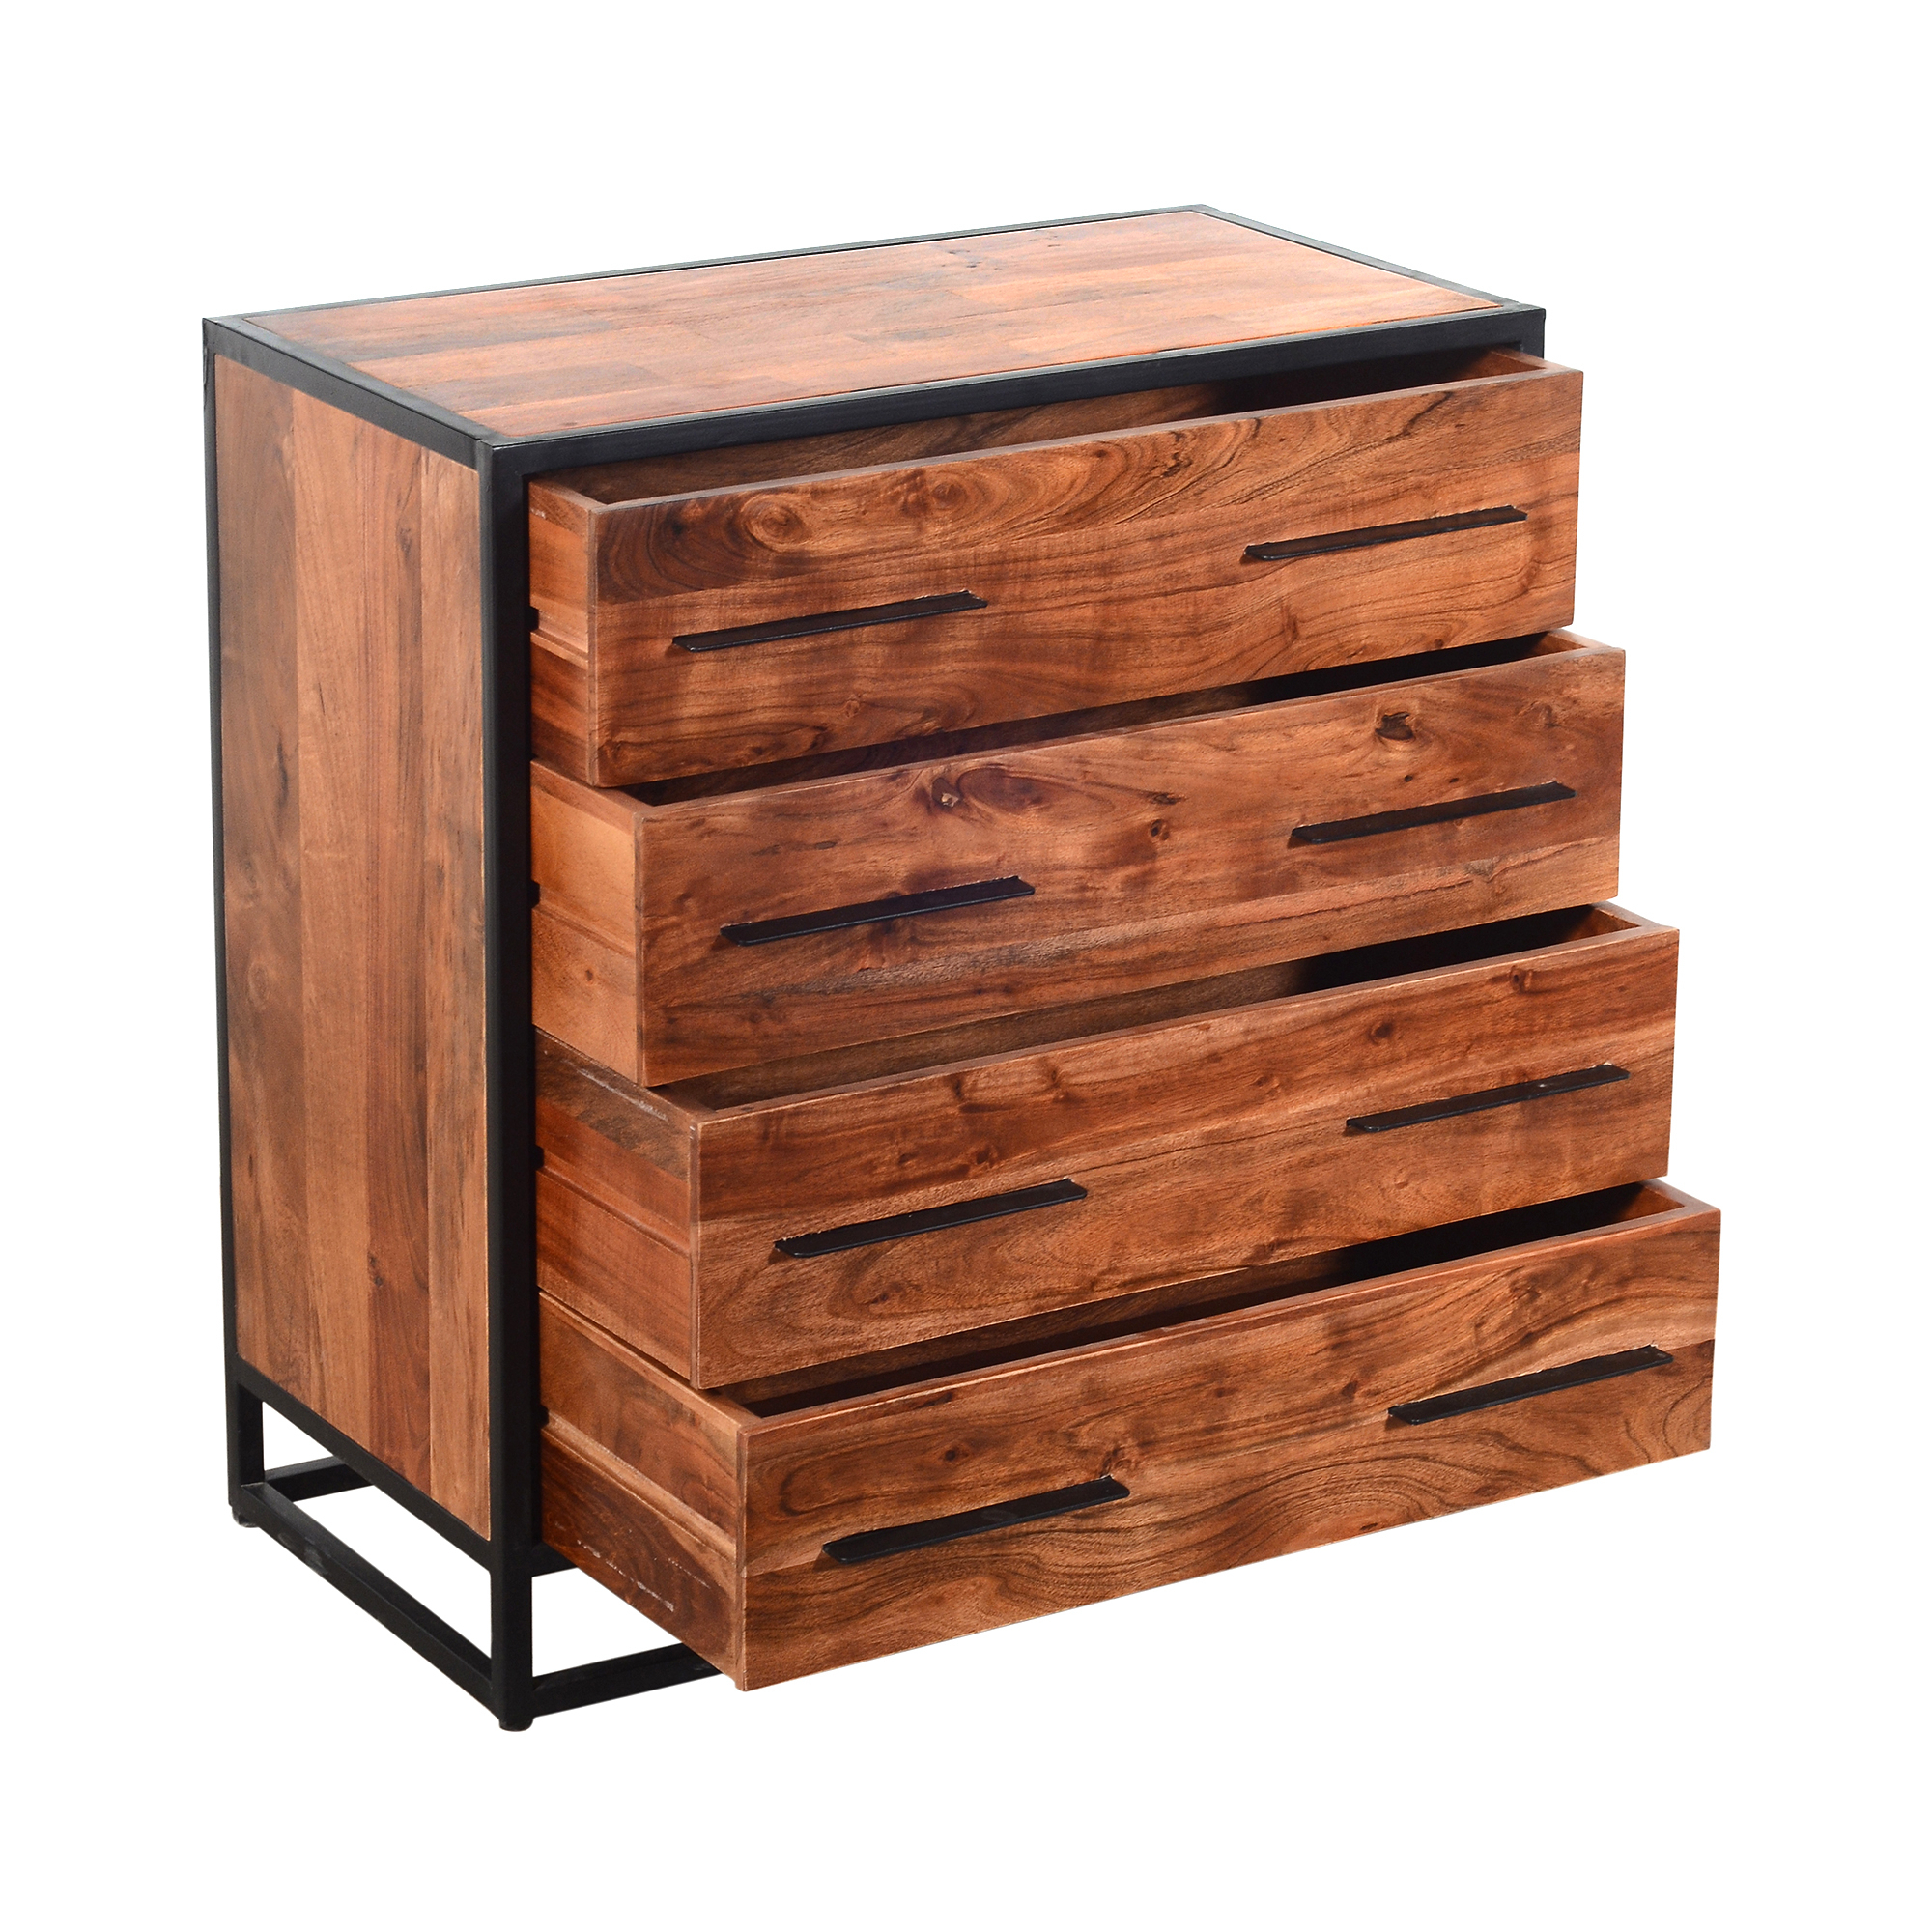 Handmade Dresser With Grain Details And 4 Drawers, Brown And Black- Saltoro Sherpi